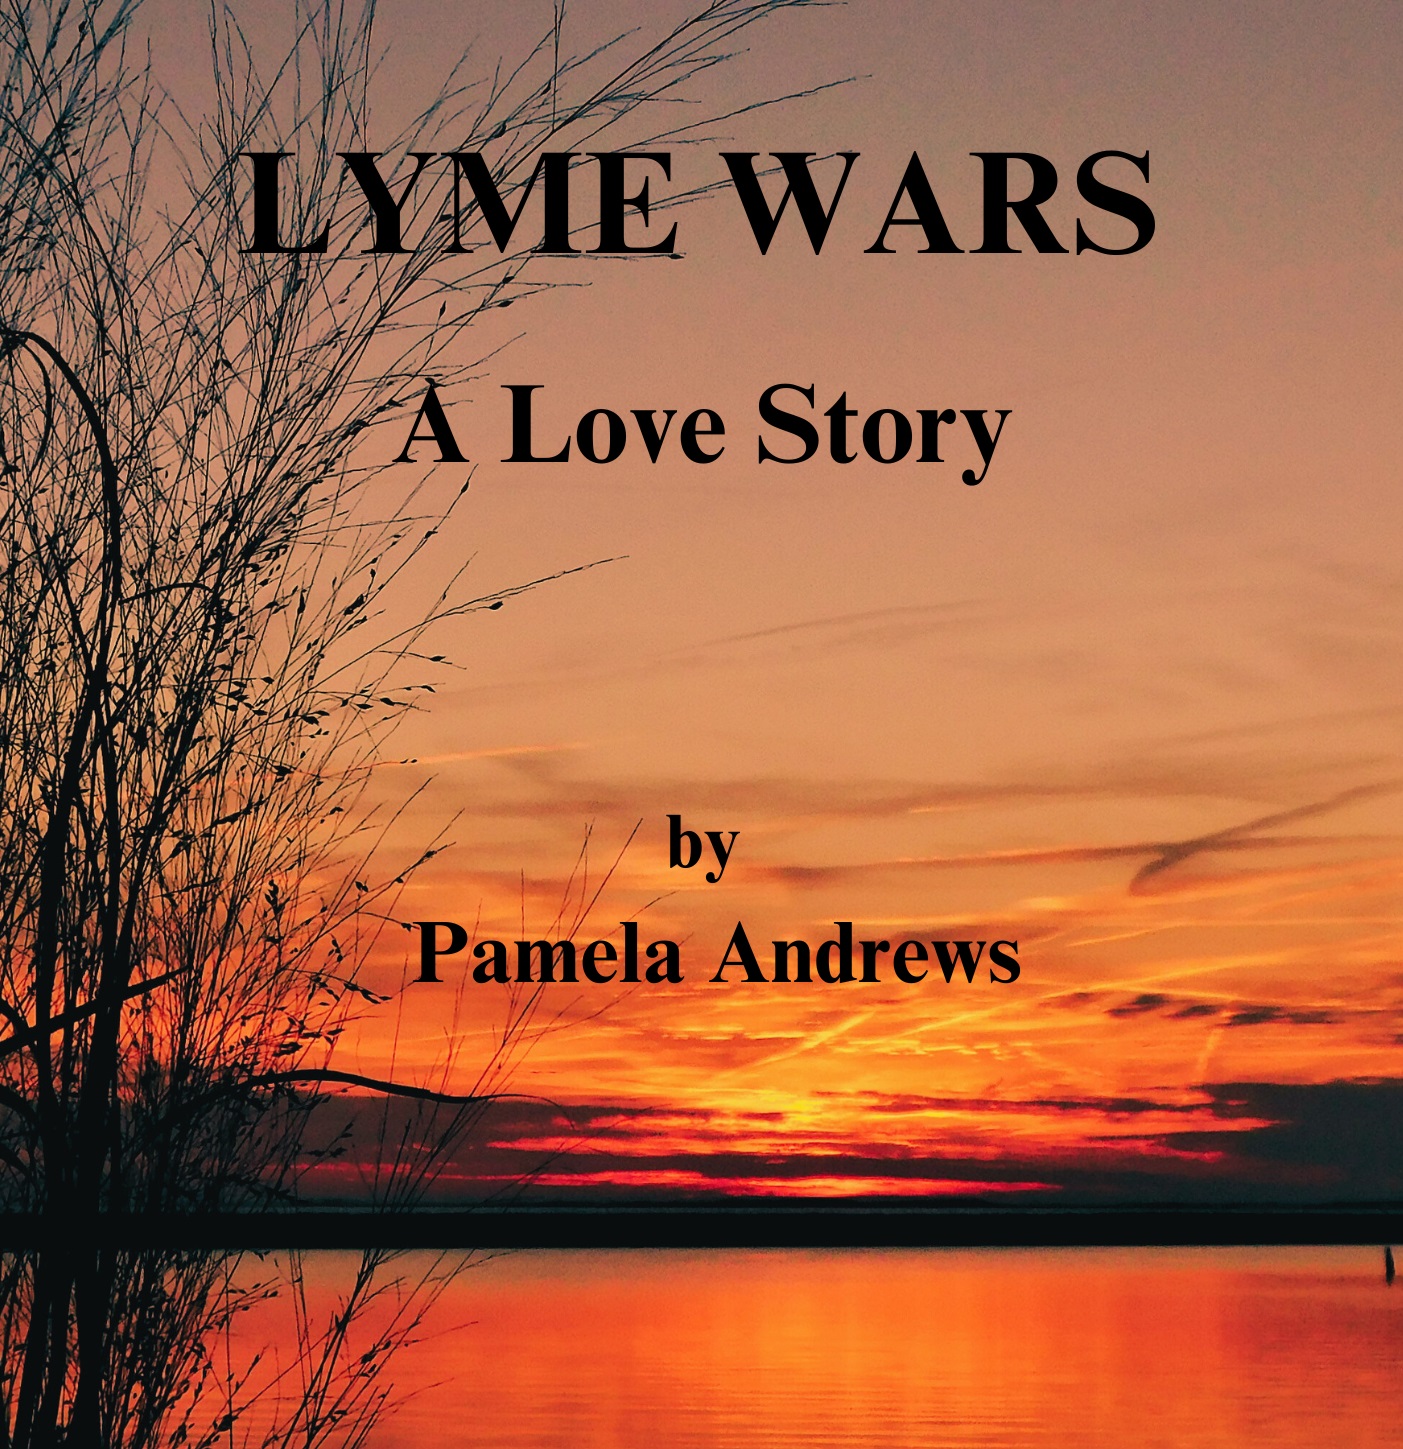 Pouring 30+ years of Lyme experience into a novel